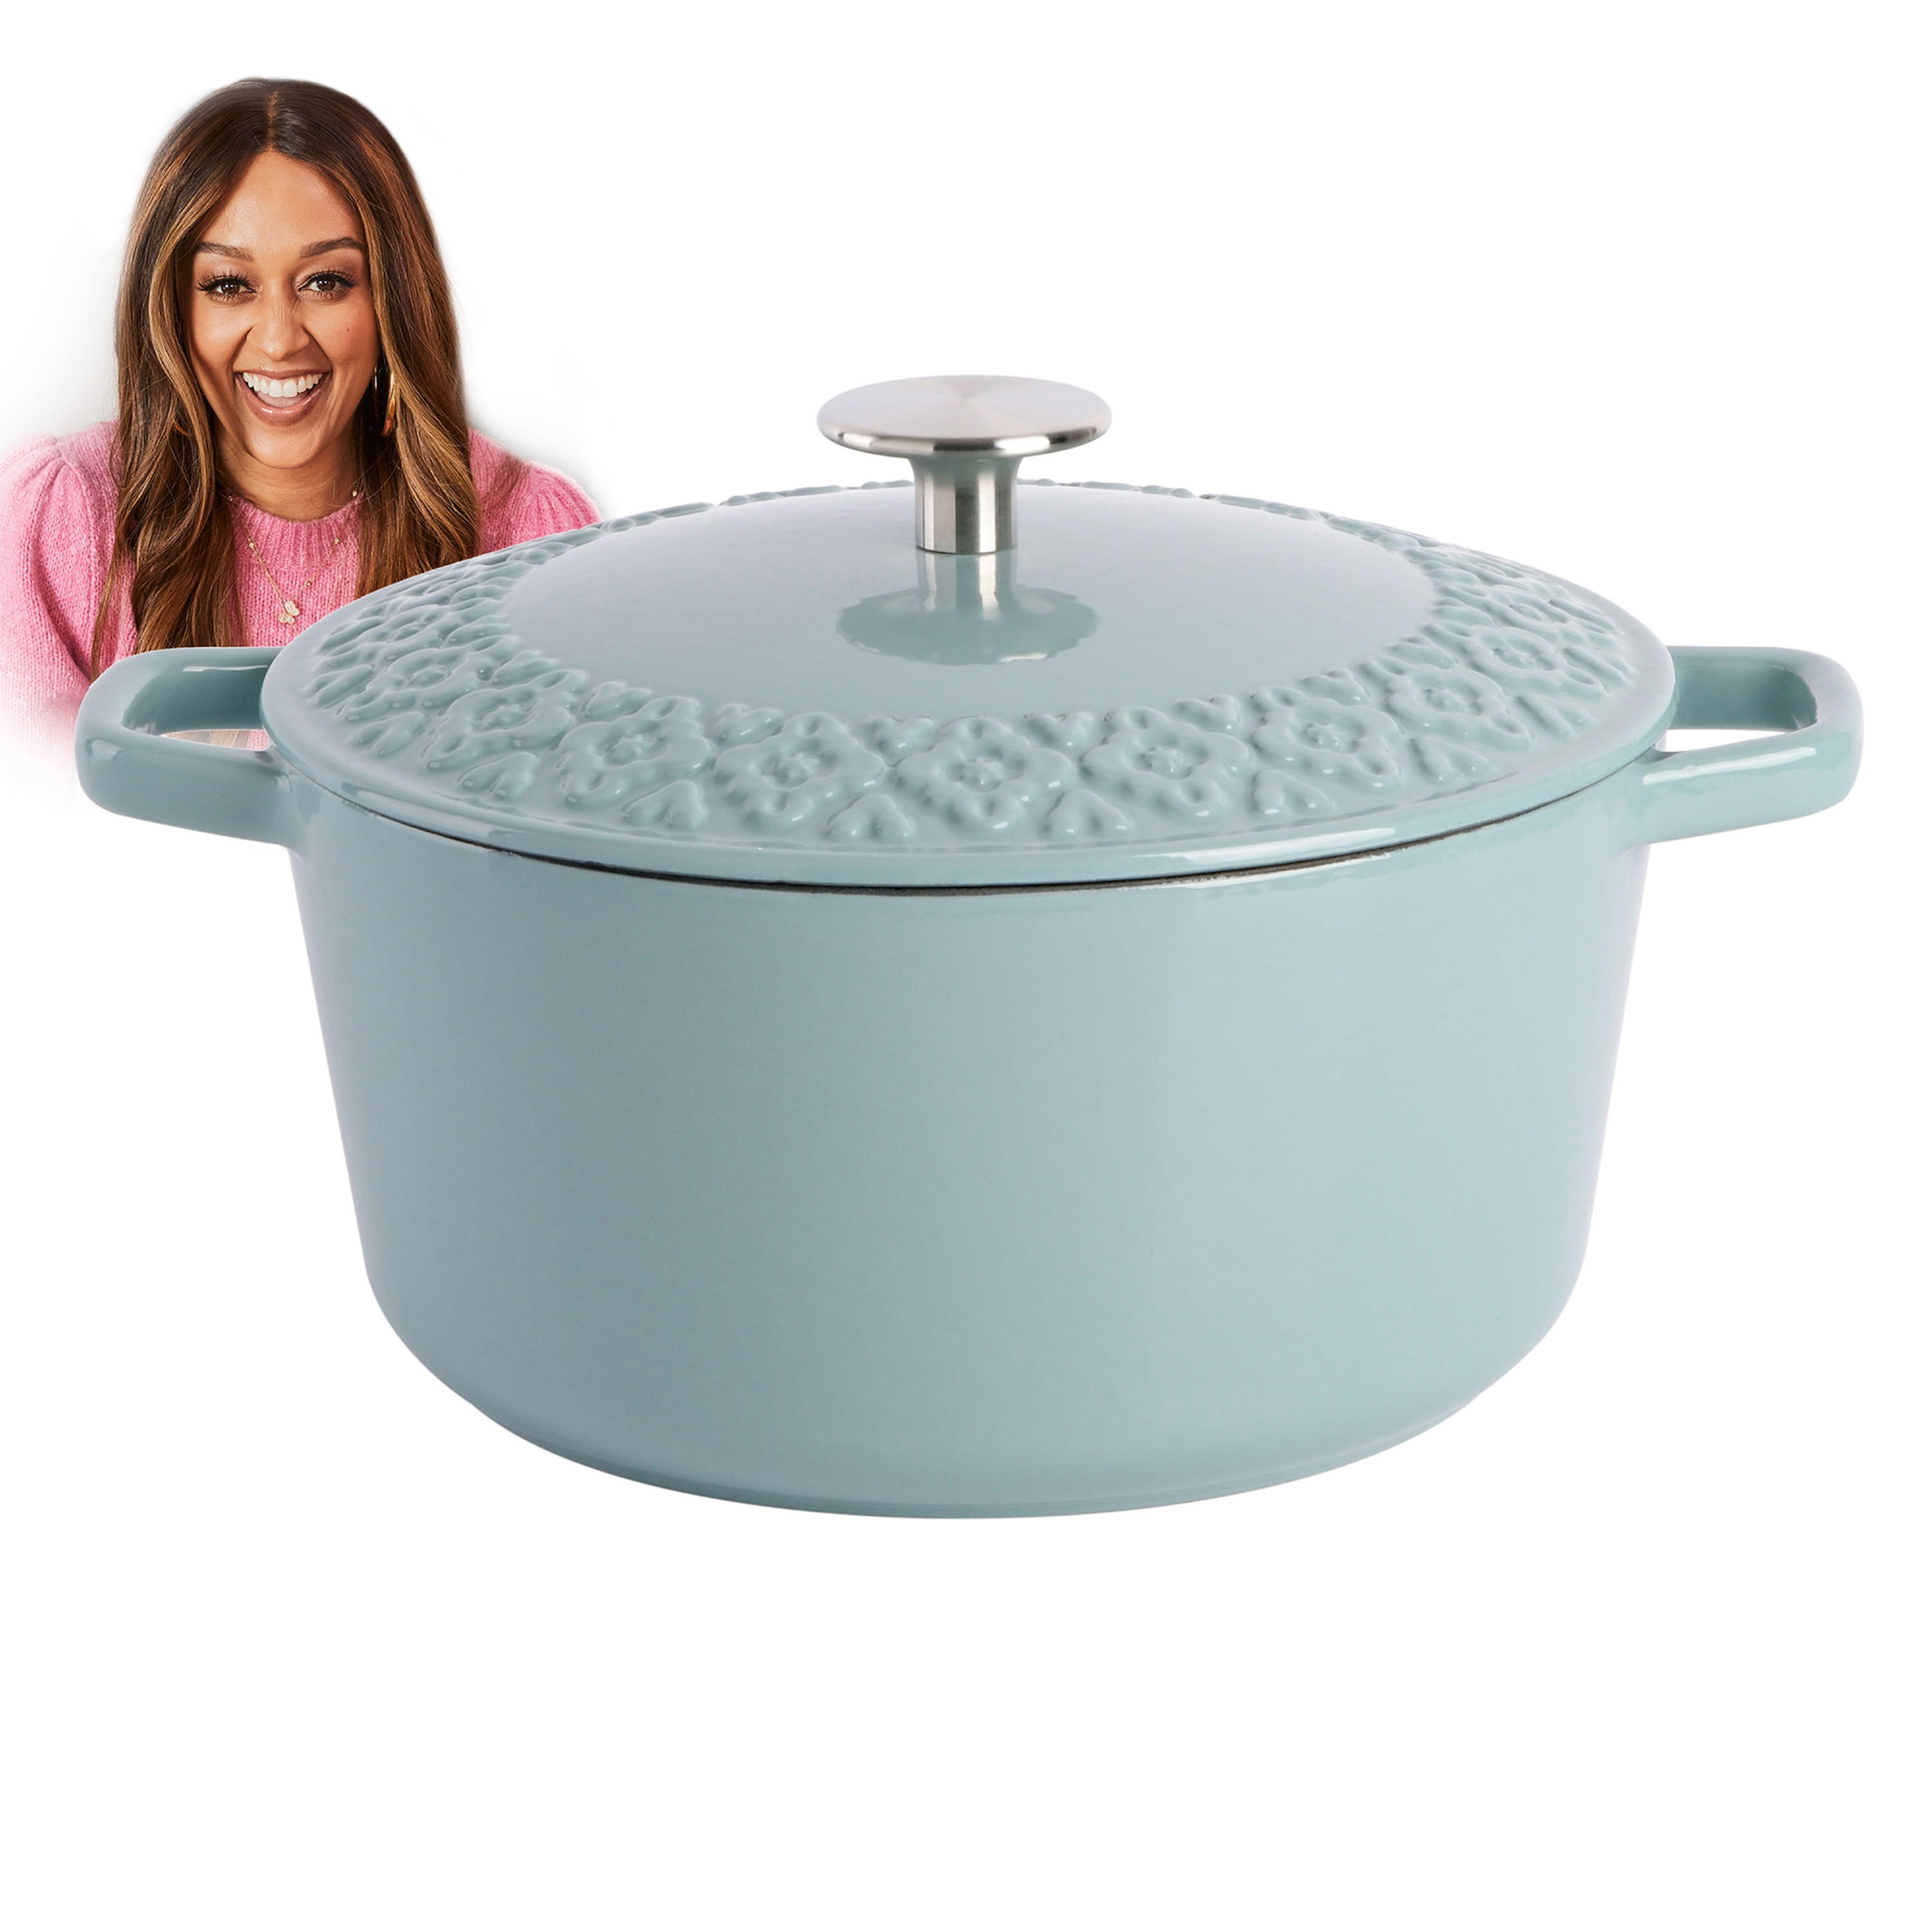 Spice by Tia Mowry Savory Saffron Healthy Nonstick 5qt Dutch Oven with Steamer Insert - Teal